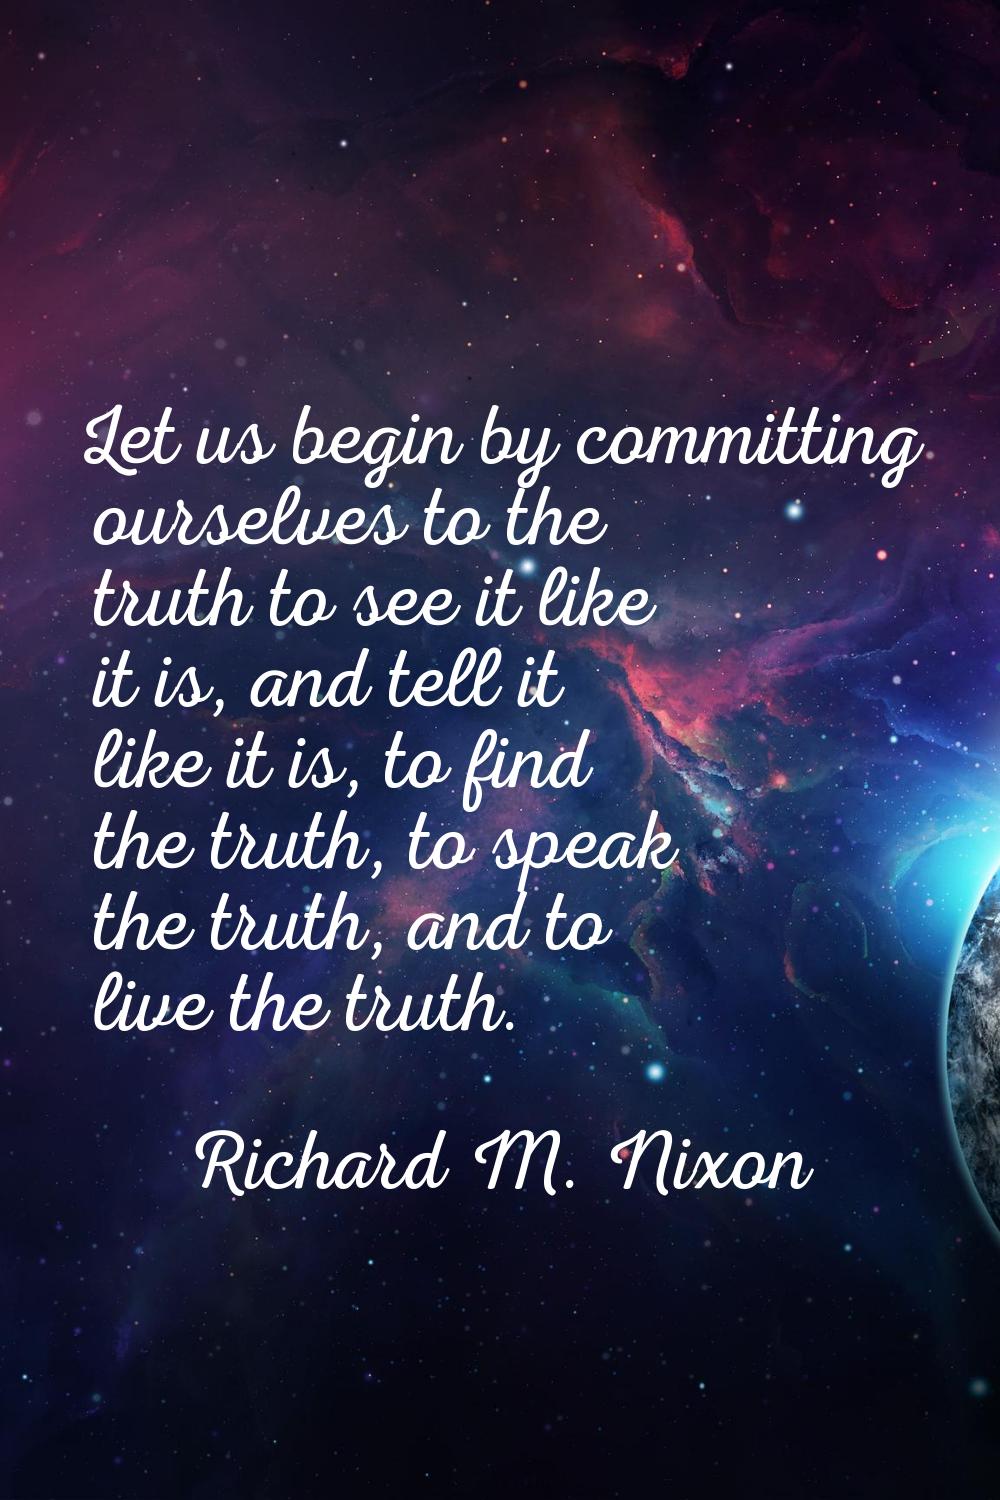 Let us begin by committing ourselves to the truth to see it like it is, and tell it like it is, to 